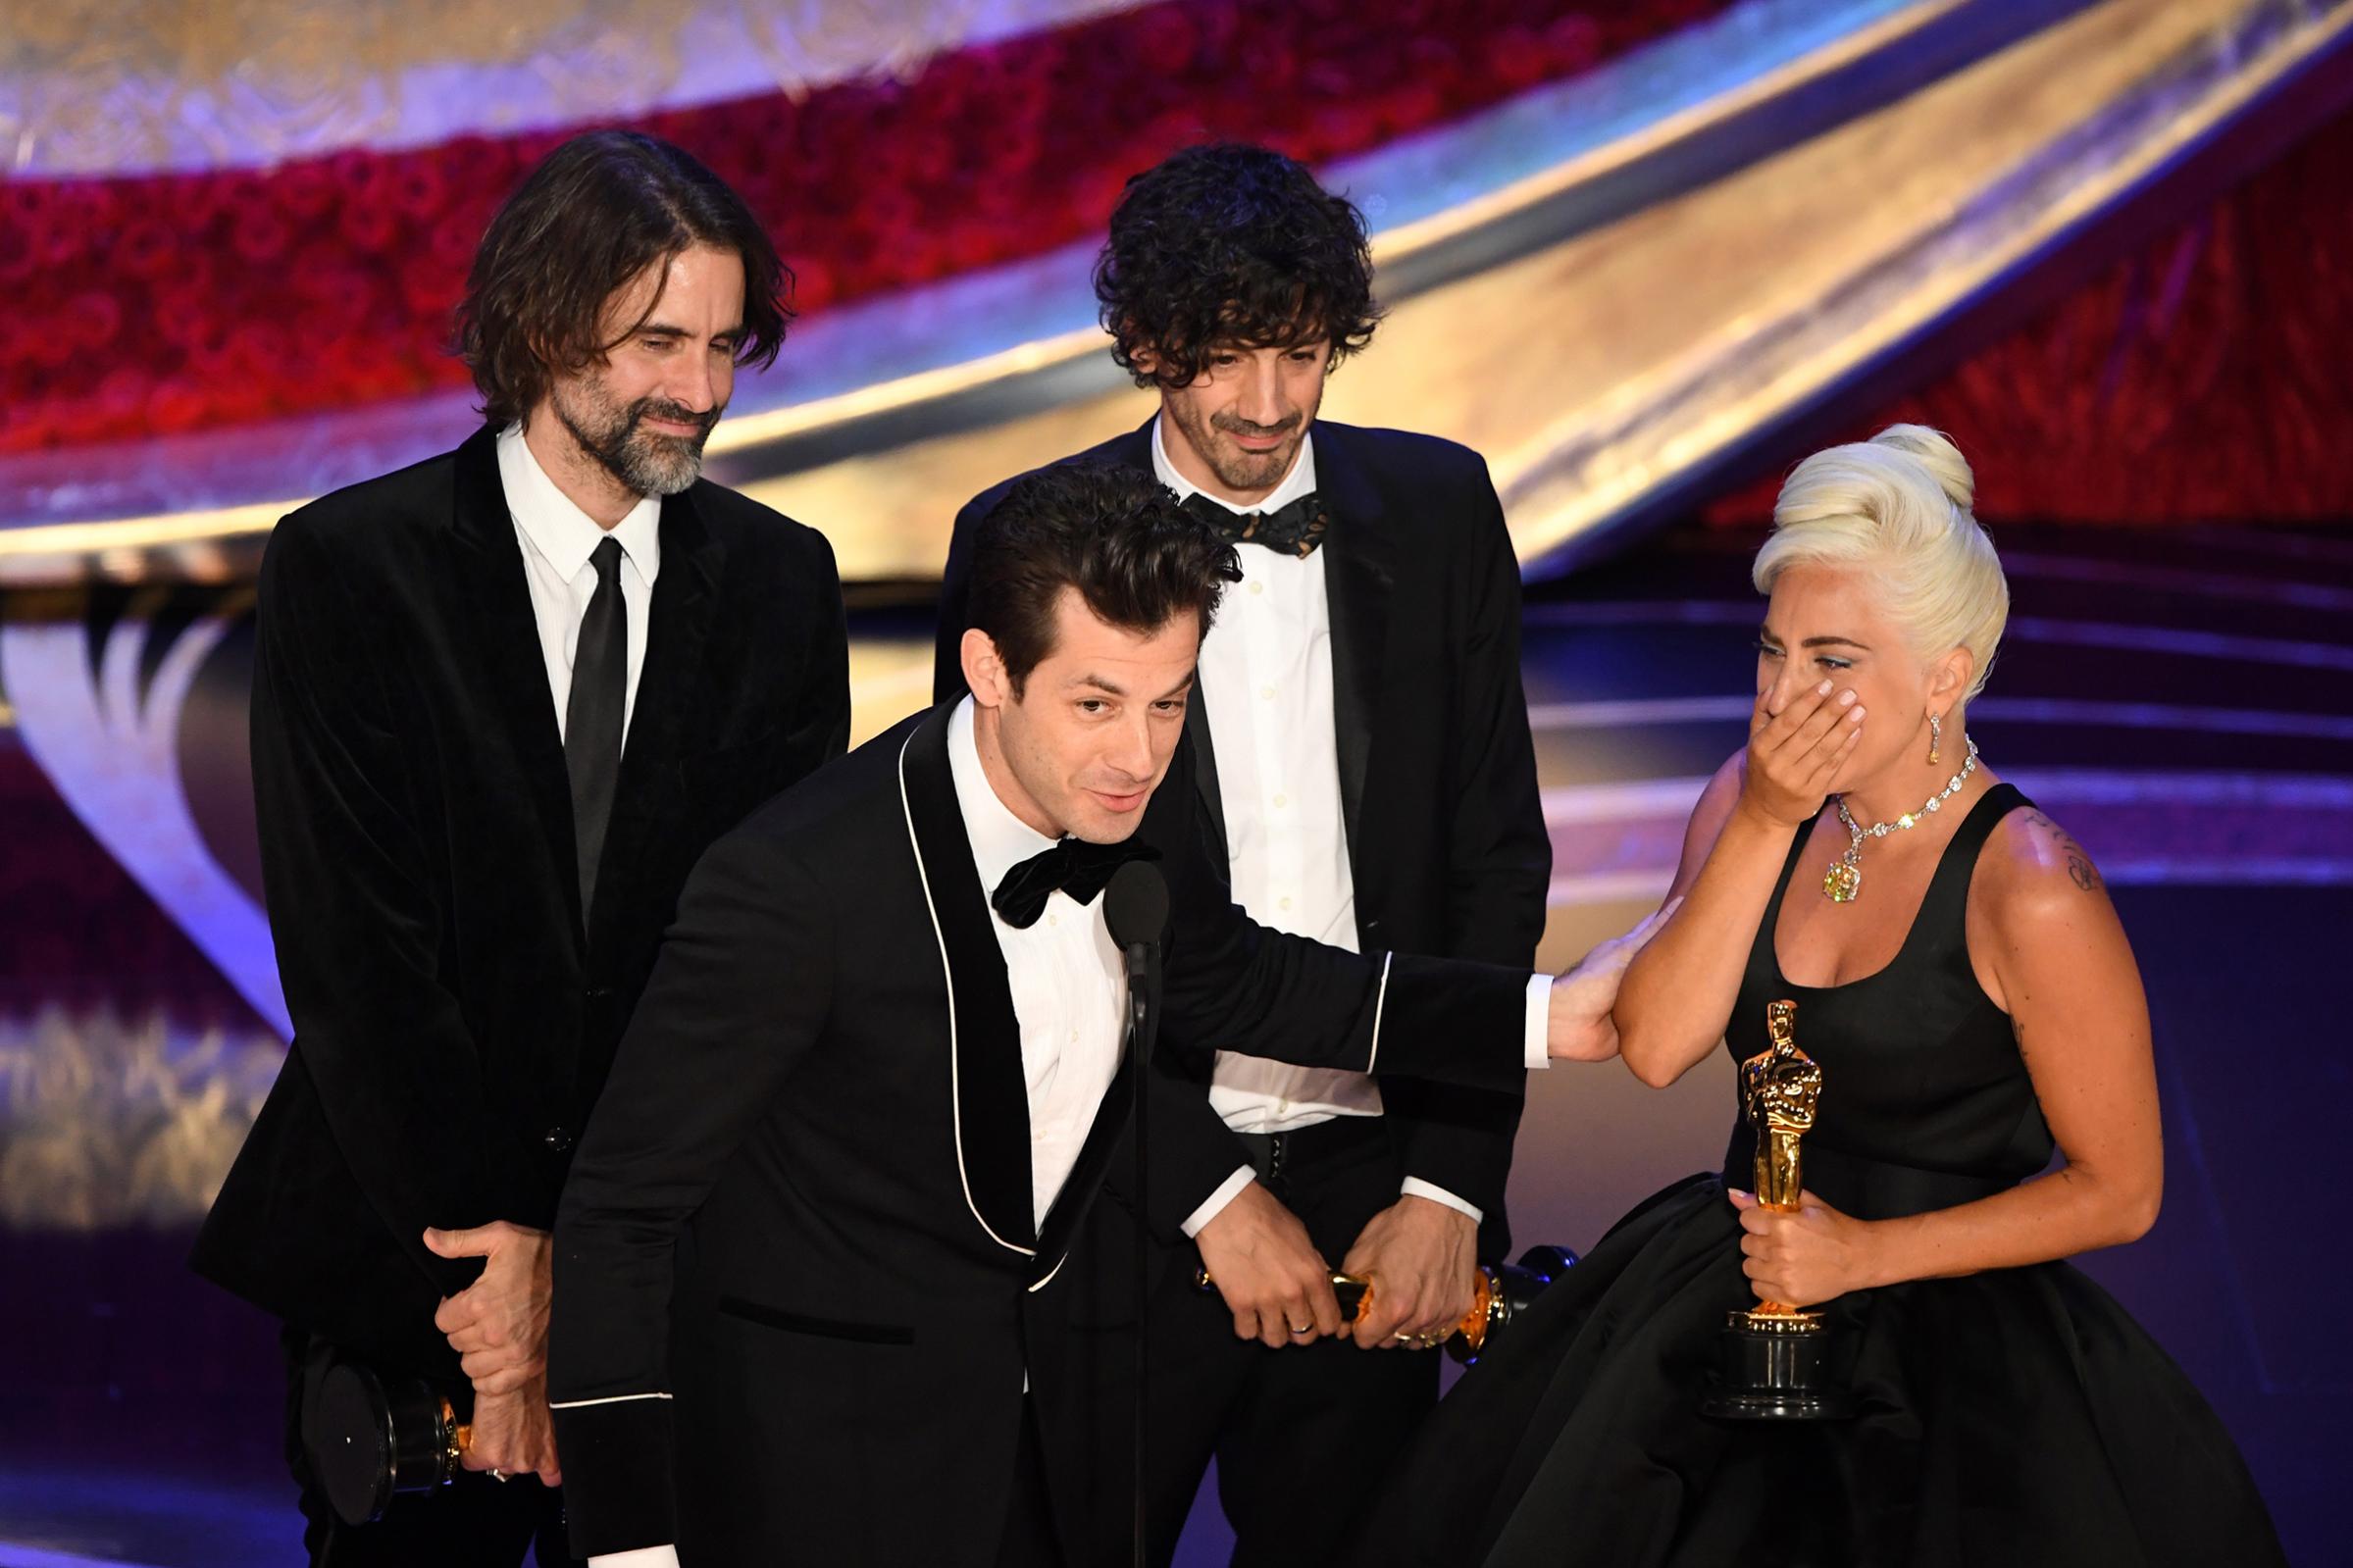 Best Original Song nominees for "Shallow" from "A Star is Born" Lady Gaga, Mark Ronson, Anthony Rossomando and Andrew Wyatt accept the award for Best Original Song during the 91st Annual Academy Awards at the Dolby Theatre in Hollywood, California on Feb. 24, 2019.